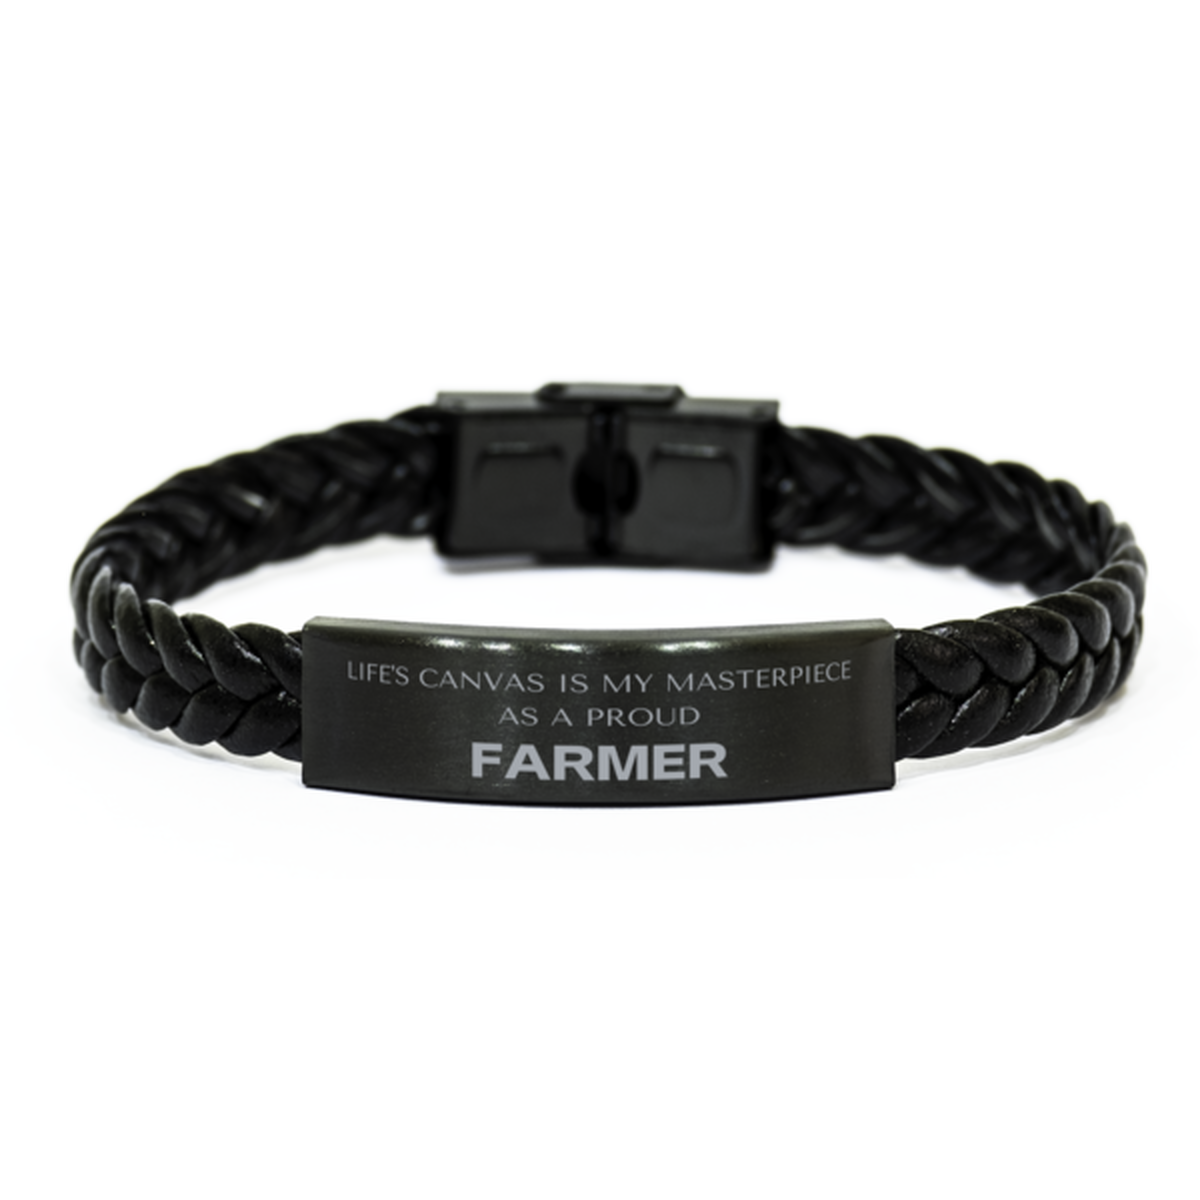 Proud Farmer Gifts, Life's canvas is my masterpiece, Epic Birthday Christmas Unique Braided Leather Bracelet For Farmer, Coworkers, Men, Women, Friends